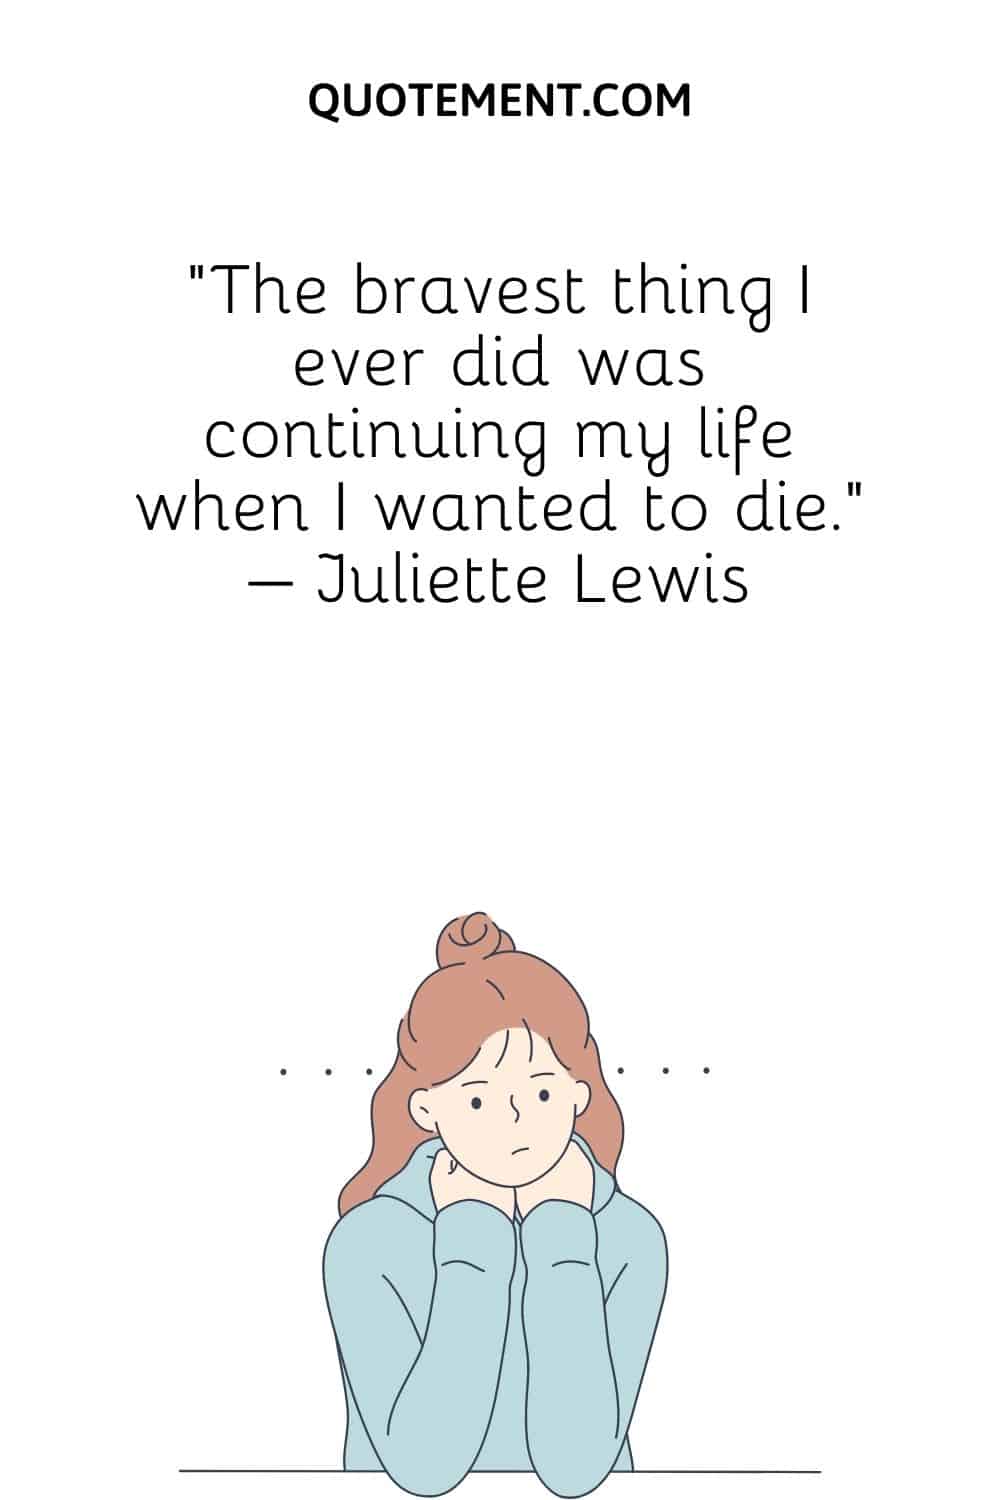 The bravest thing I ever did was continuing my life when I wanted to die